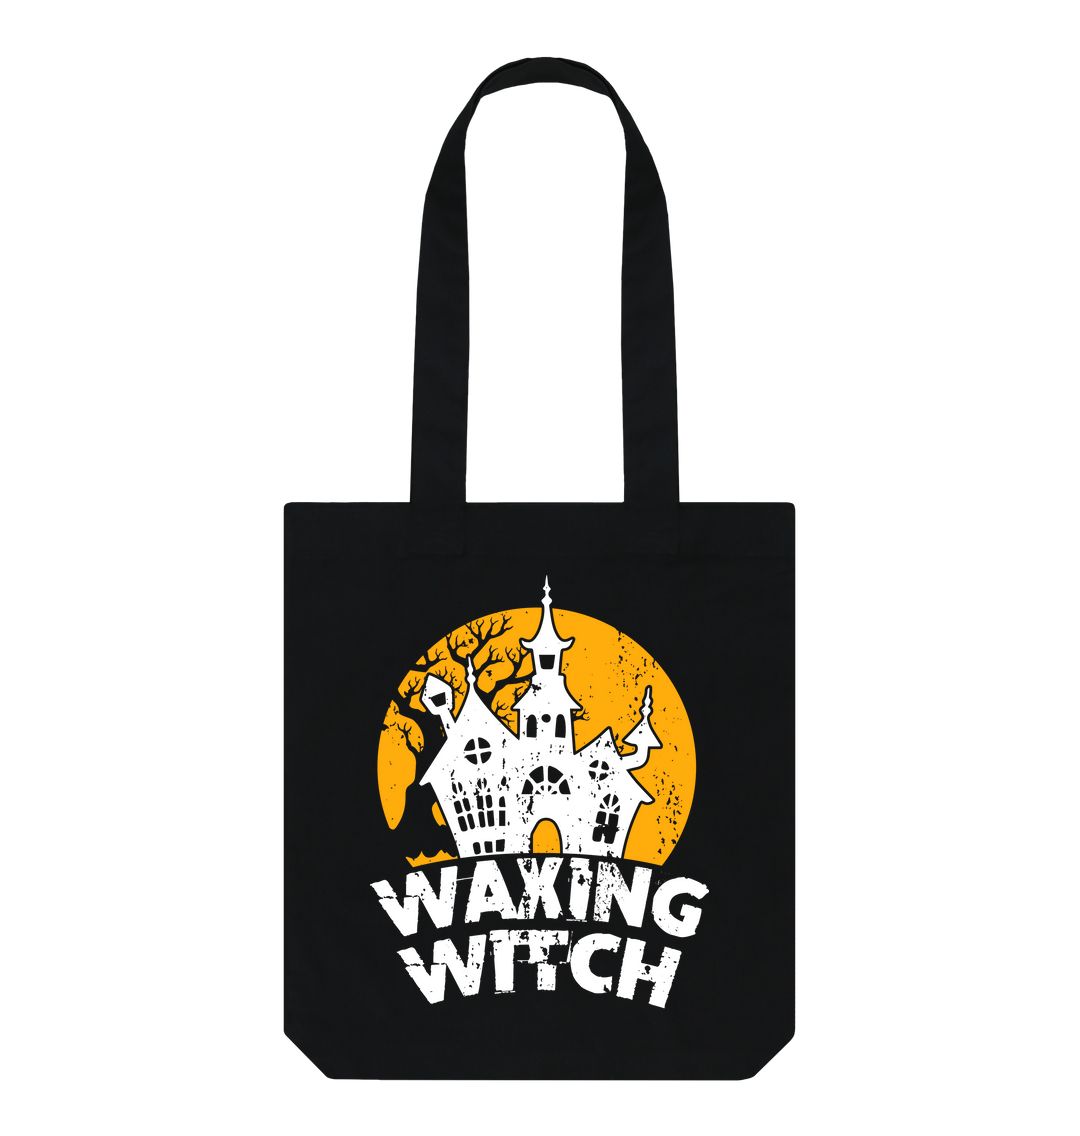 Black WAXING WITCH BAG